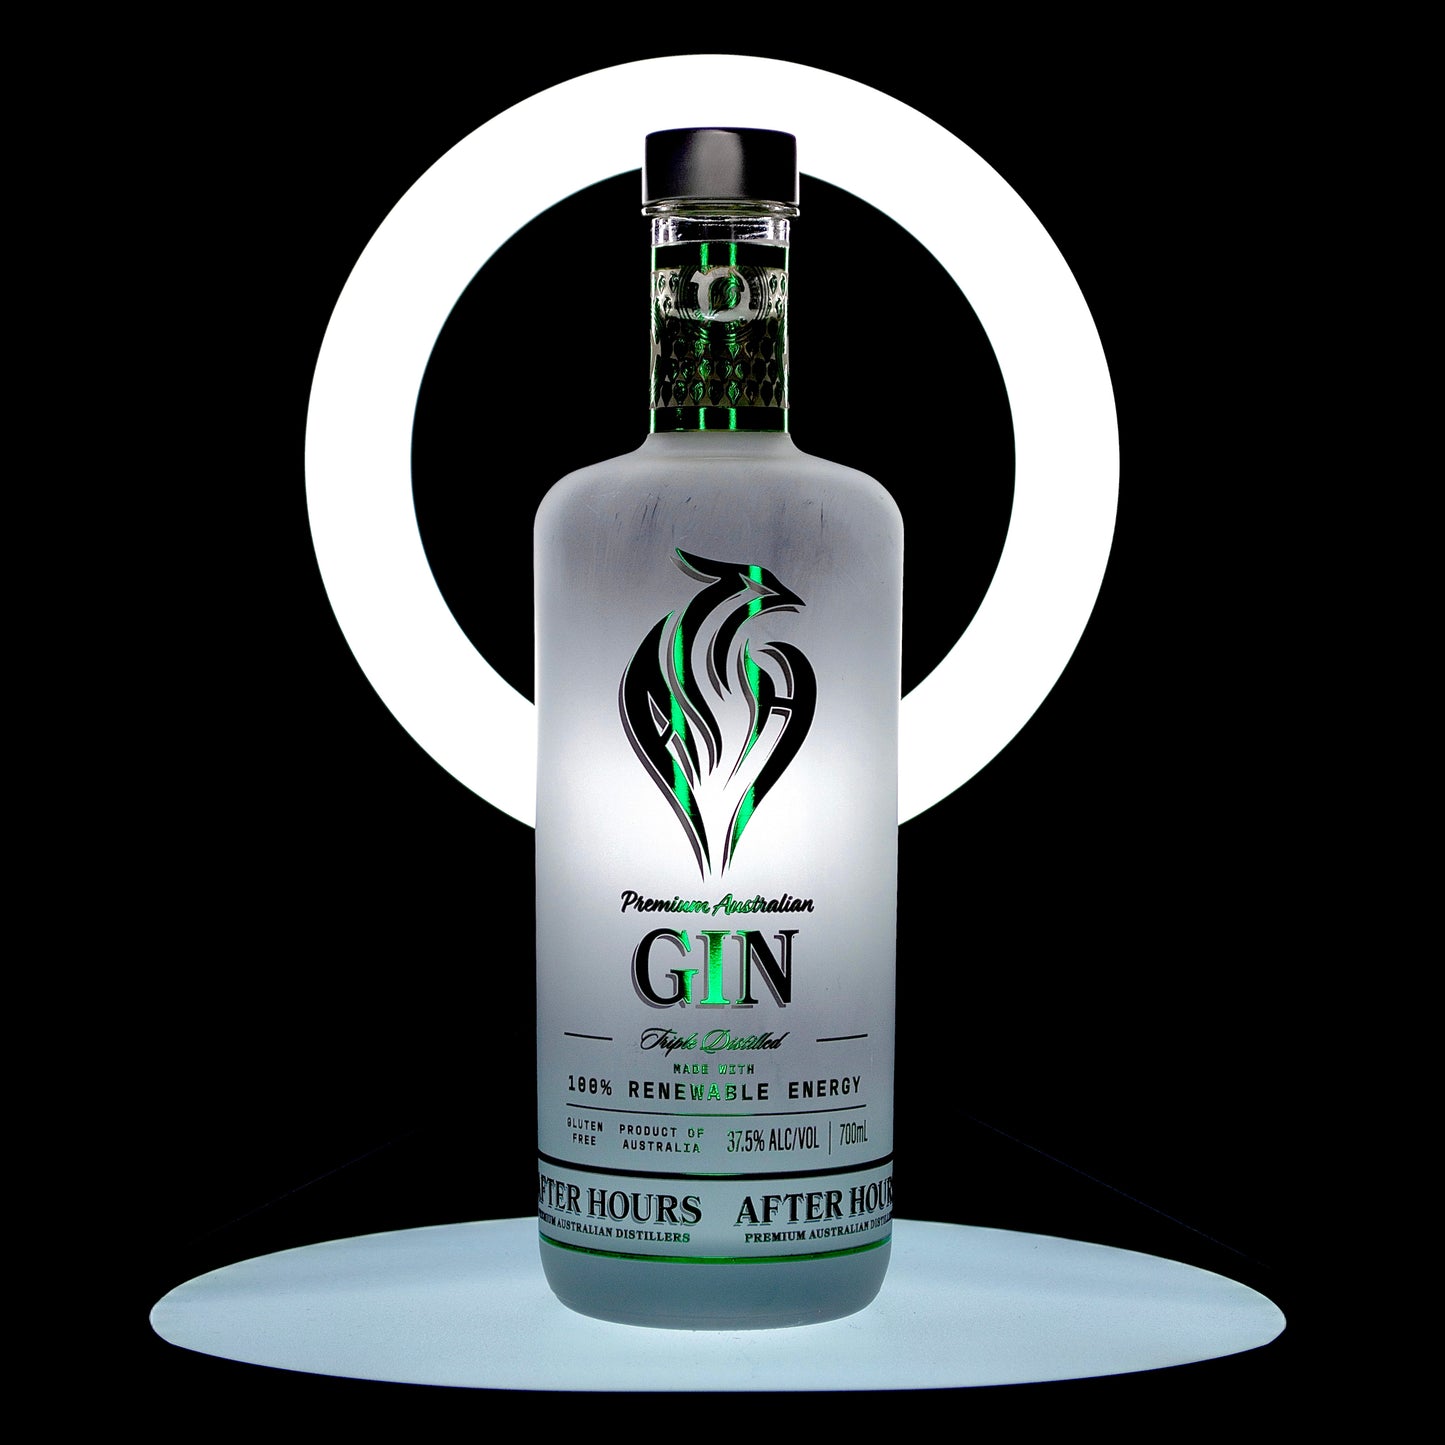 After Hours Ultra-Premium Gin